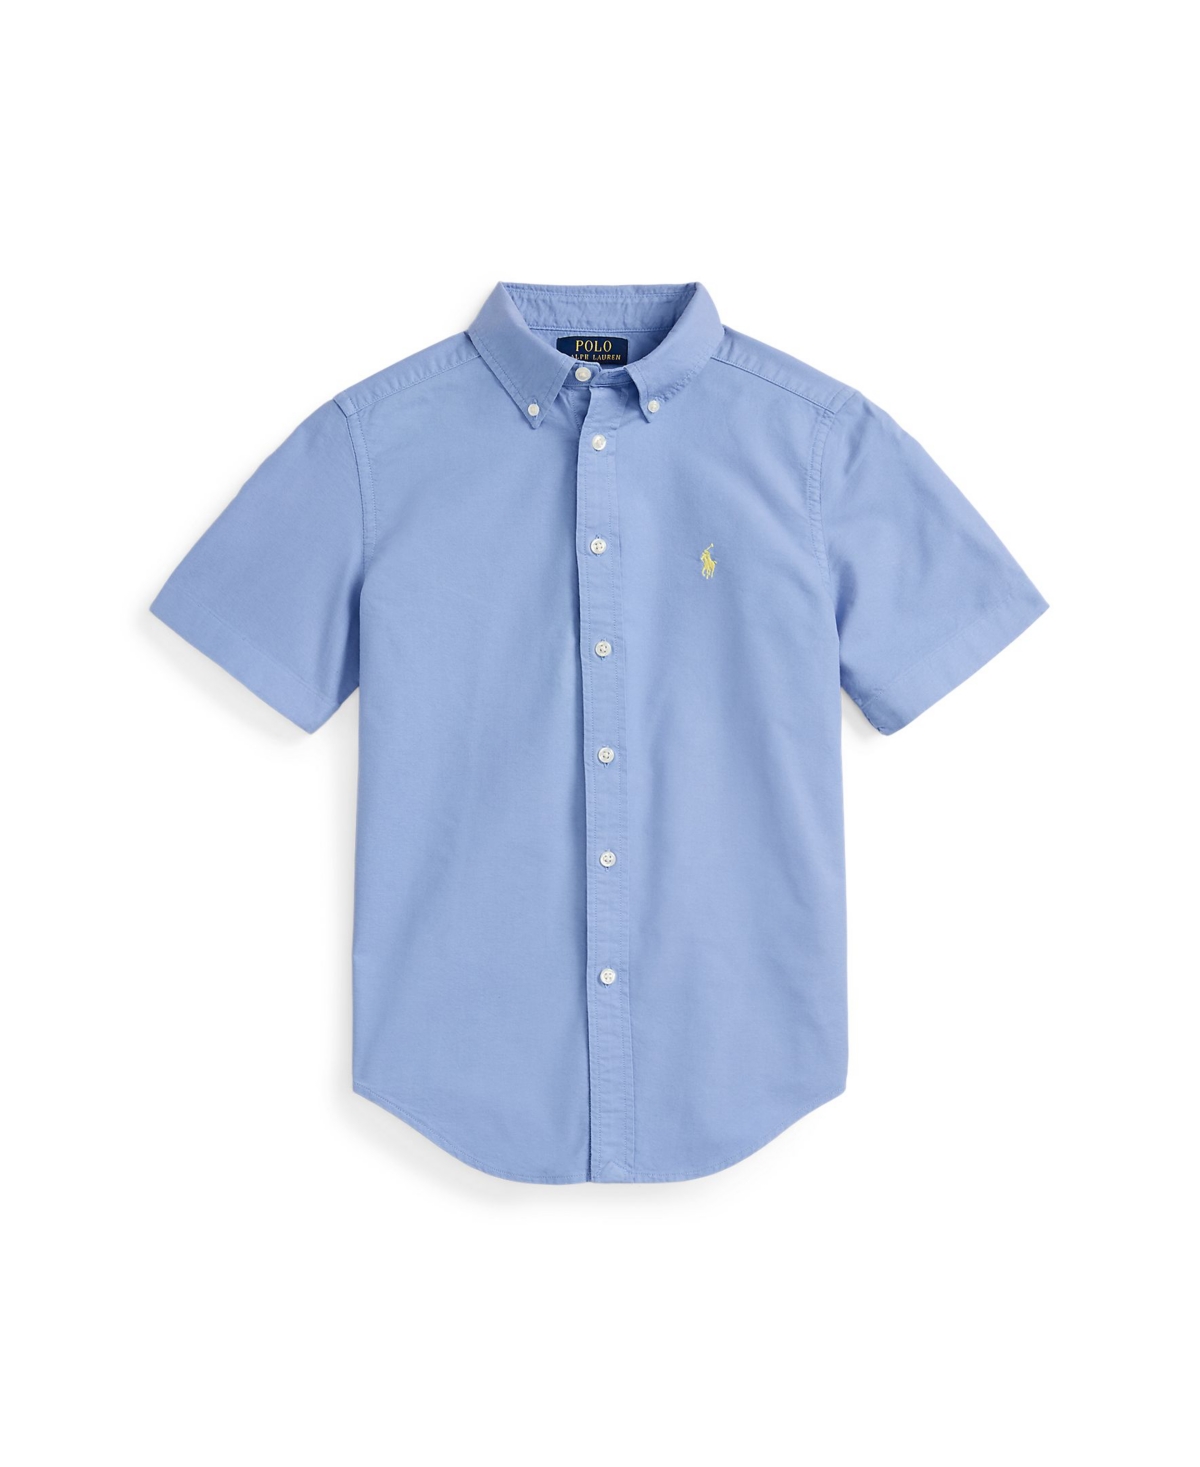 Polo Ralph Lauren Kids' Toddler And Little Boys Cotton Oxford Short-sleeves Shirt In Harbor Island Blue